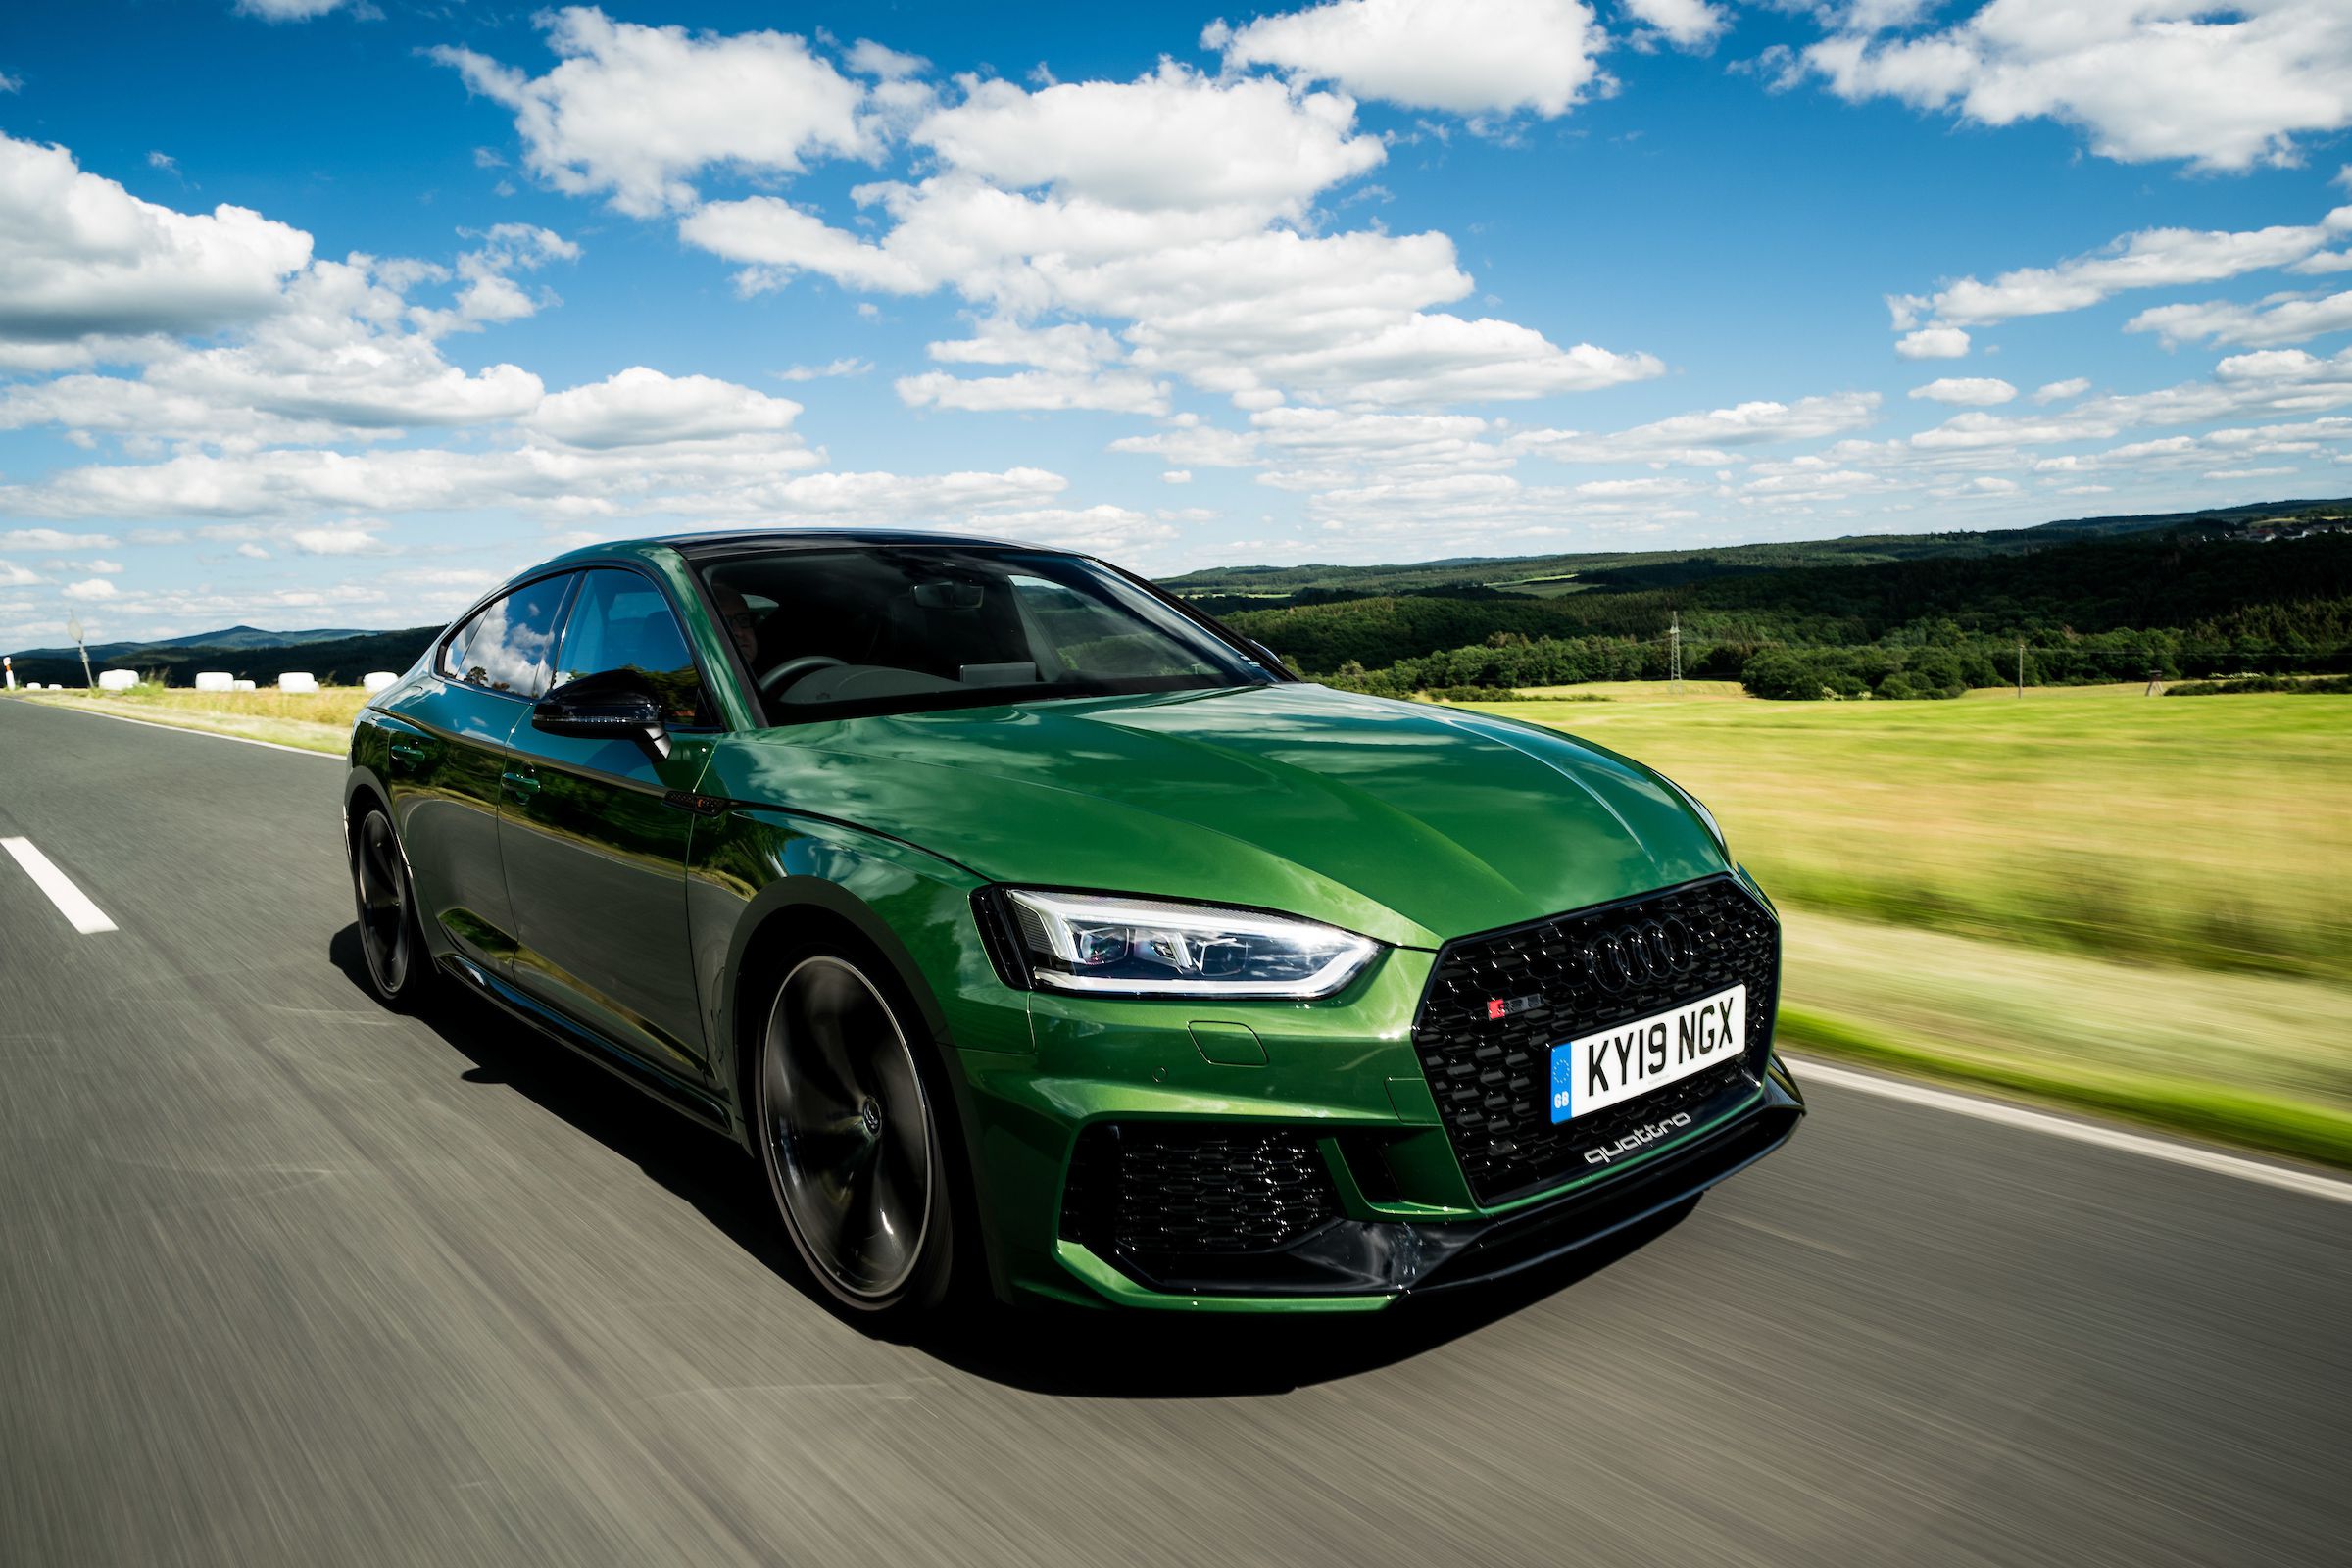 Front view of a green Audi RS5 Sportback